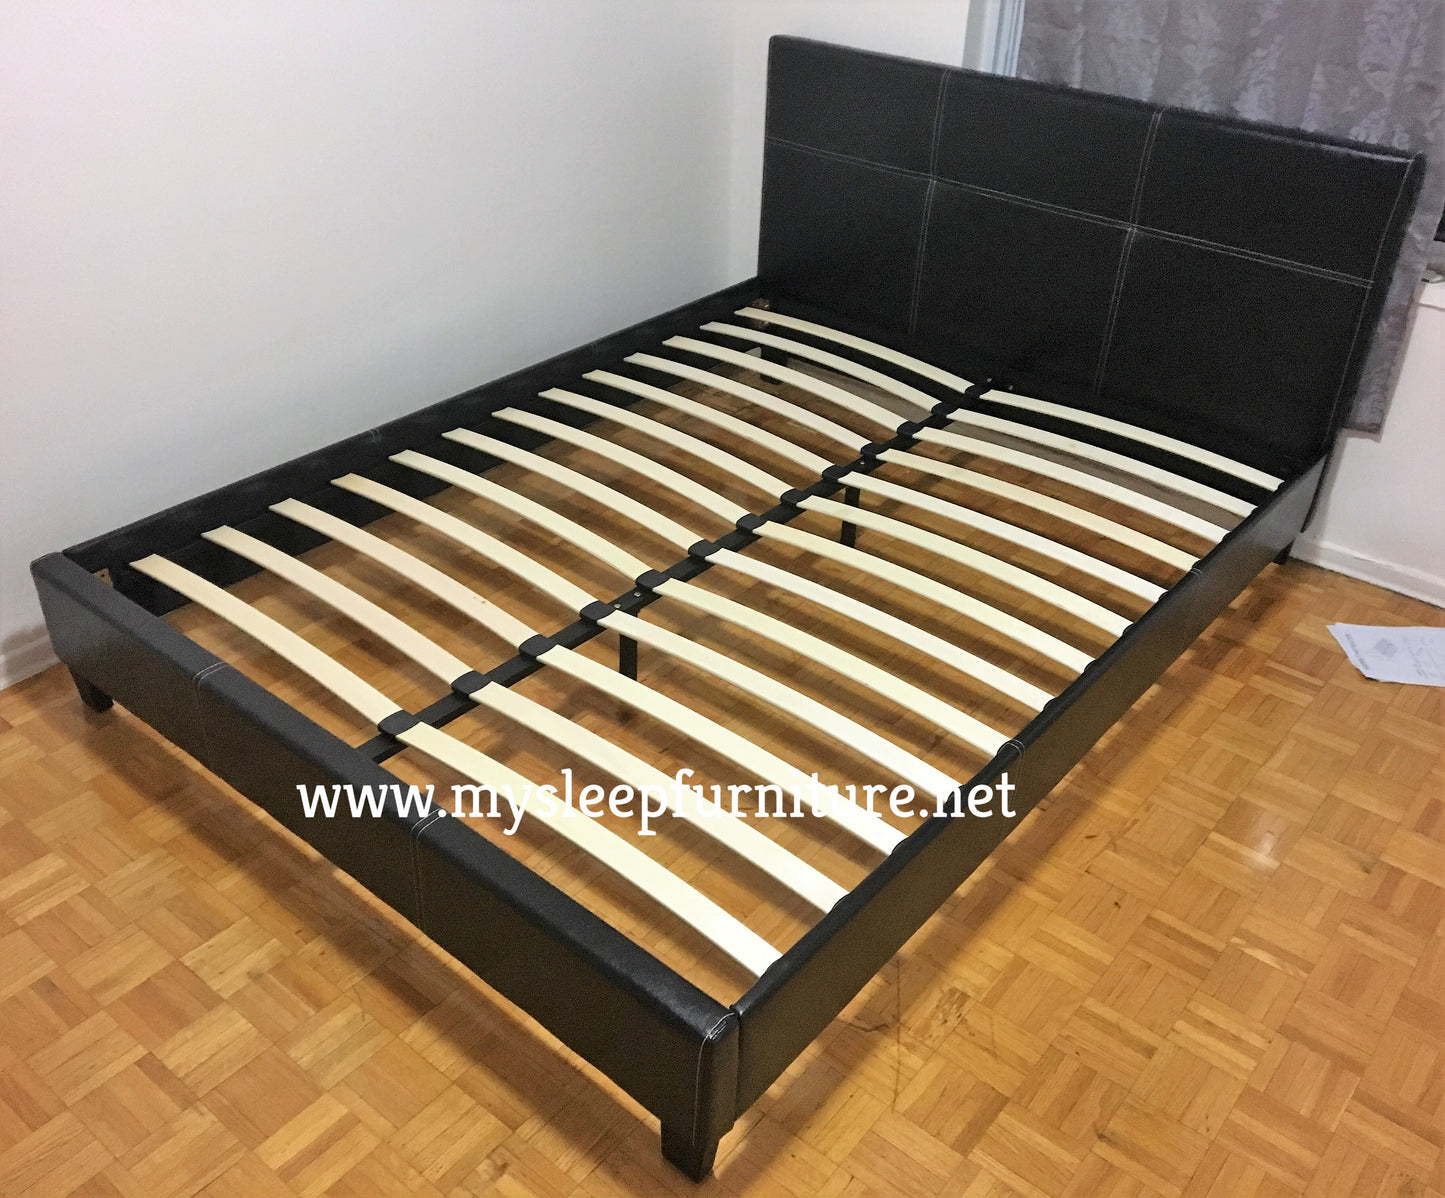 QUEEN SIZE- (2358 BLACK)- LEATHER BED FRAME- WITH SLATS- INVENTORY CLEARANCE